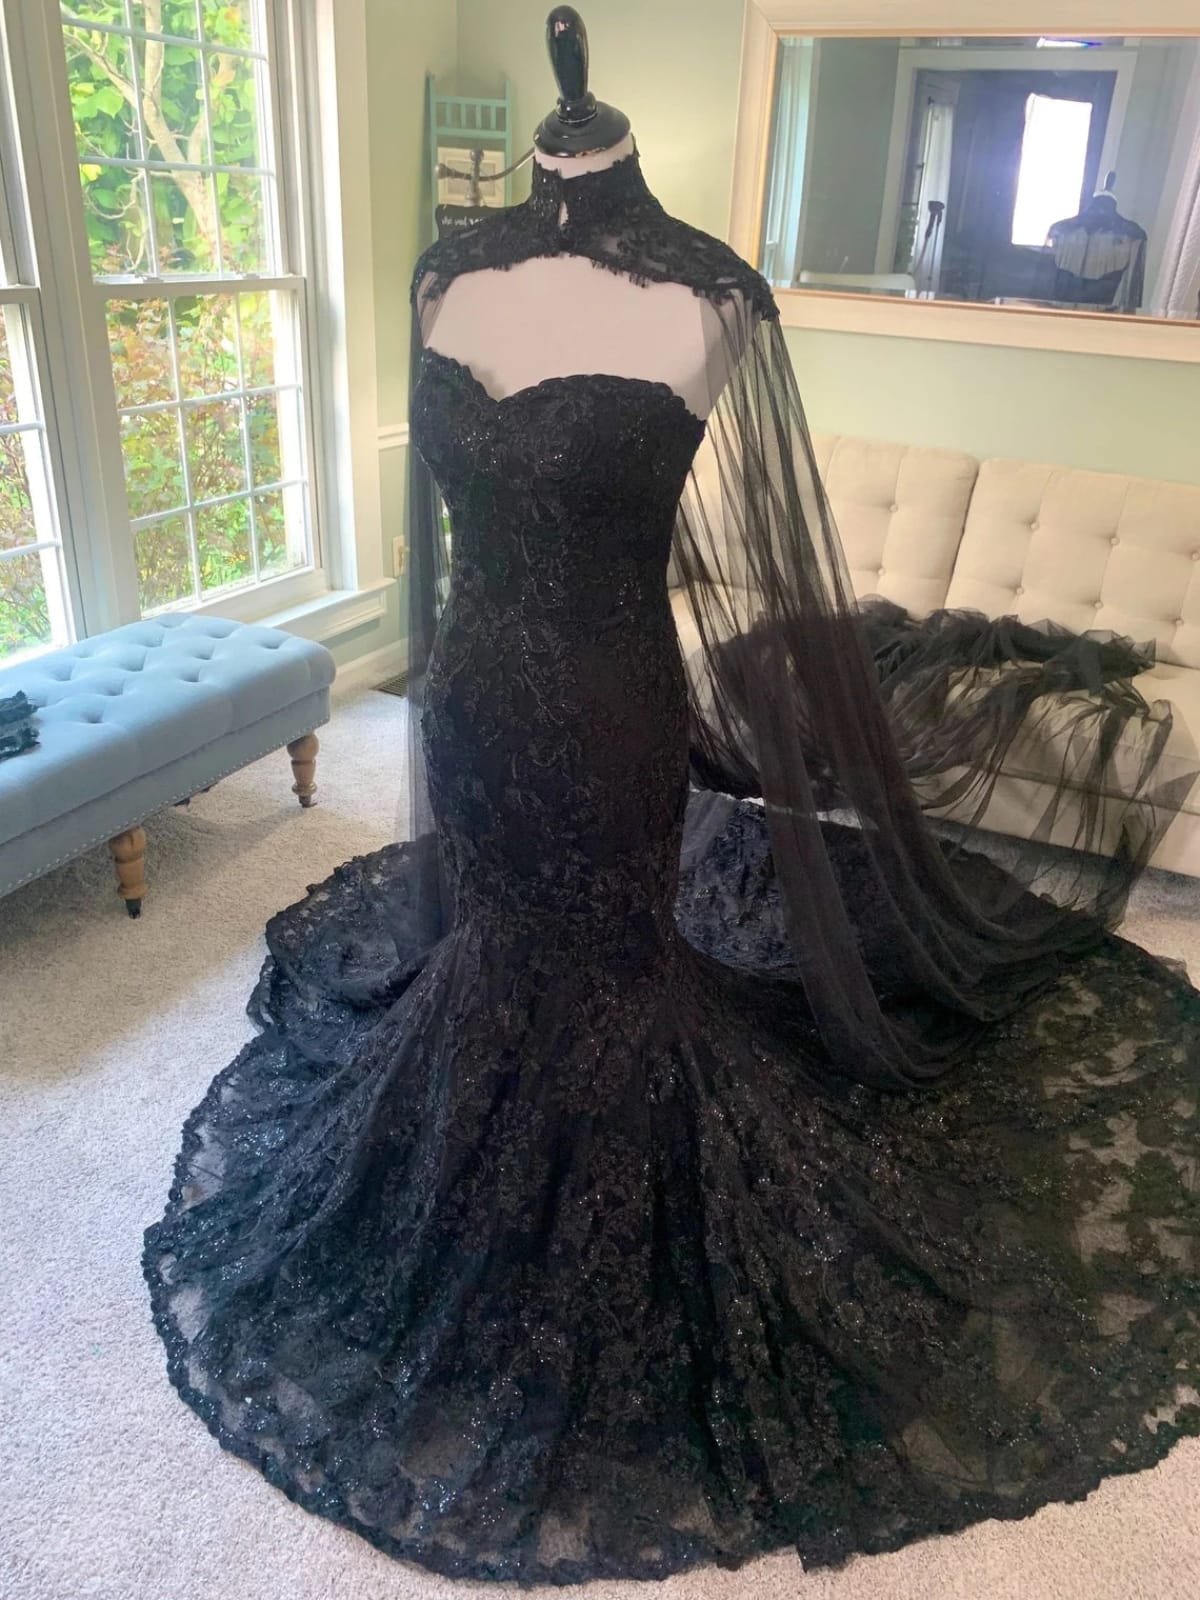 Mermaid Lace 3 in 1 Black Wedding Dress, Cape Veil, Removable Sleeves